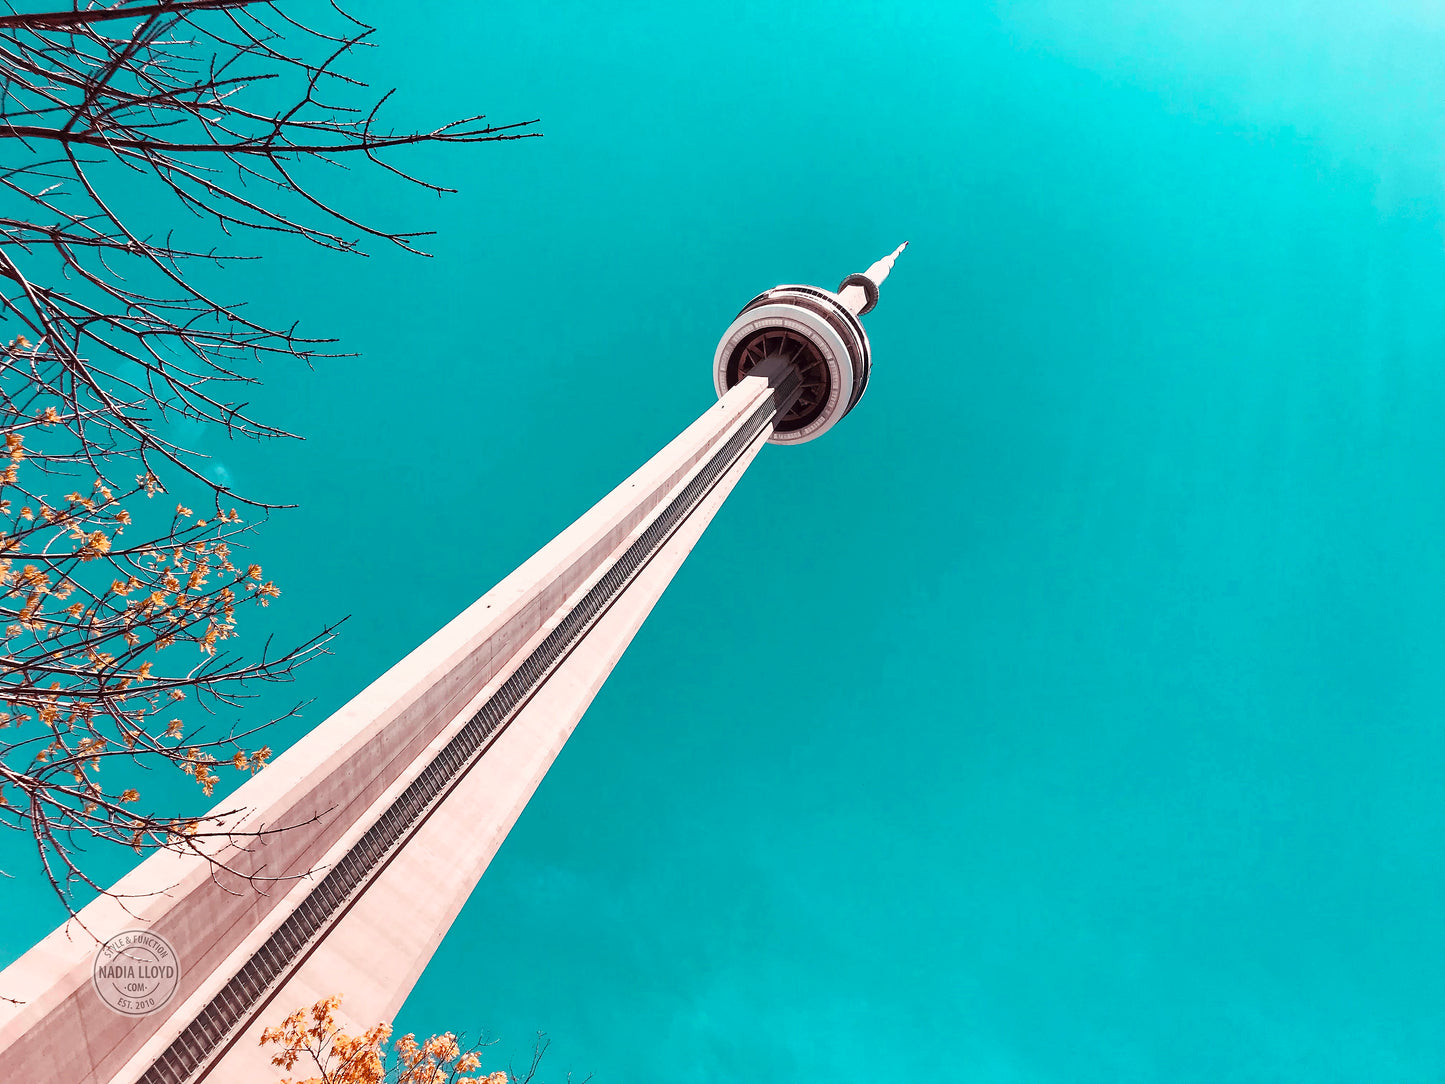 THE CN TOWER Canvas Print